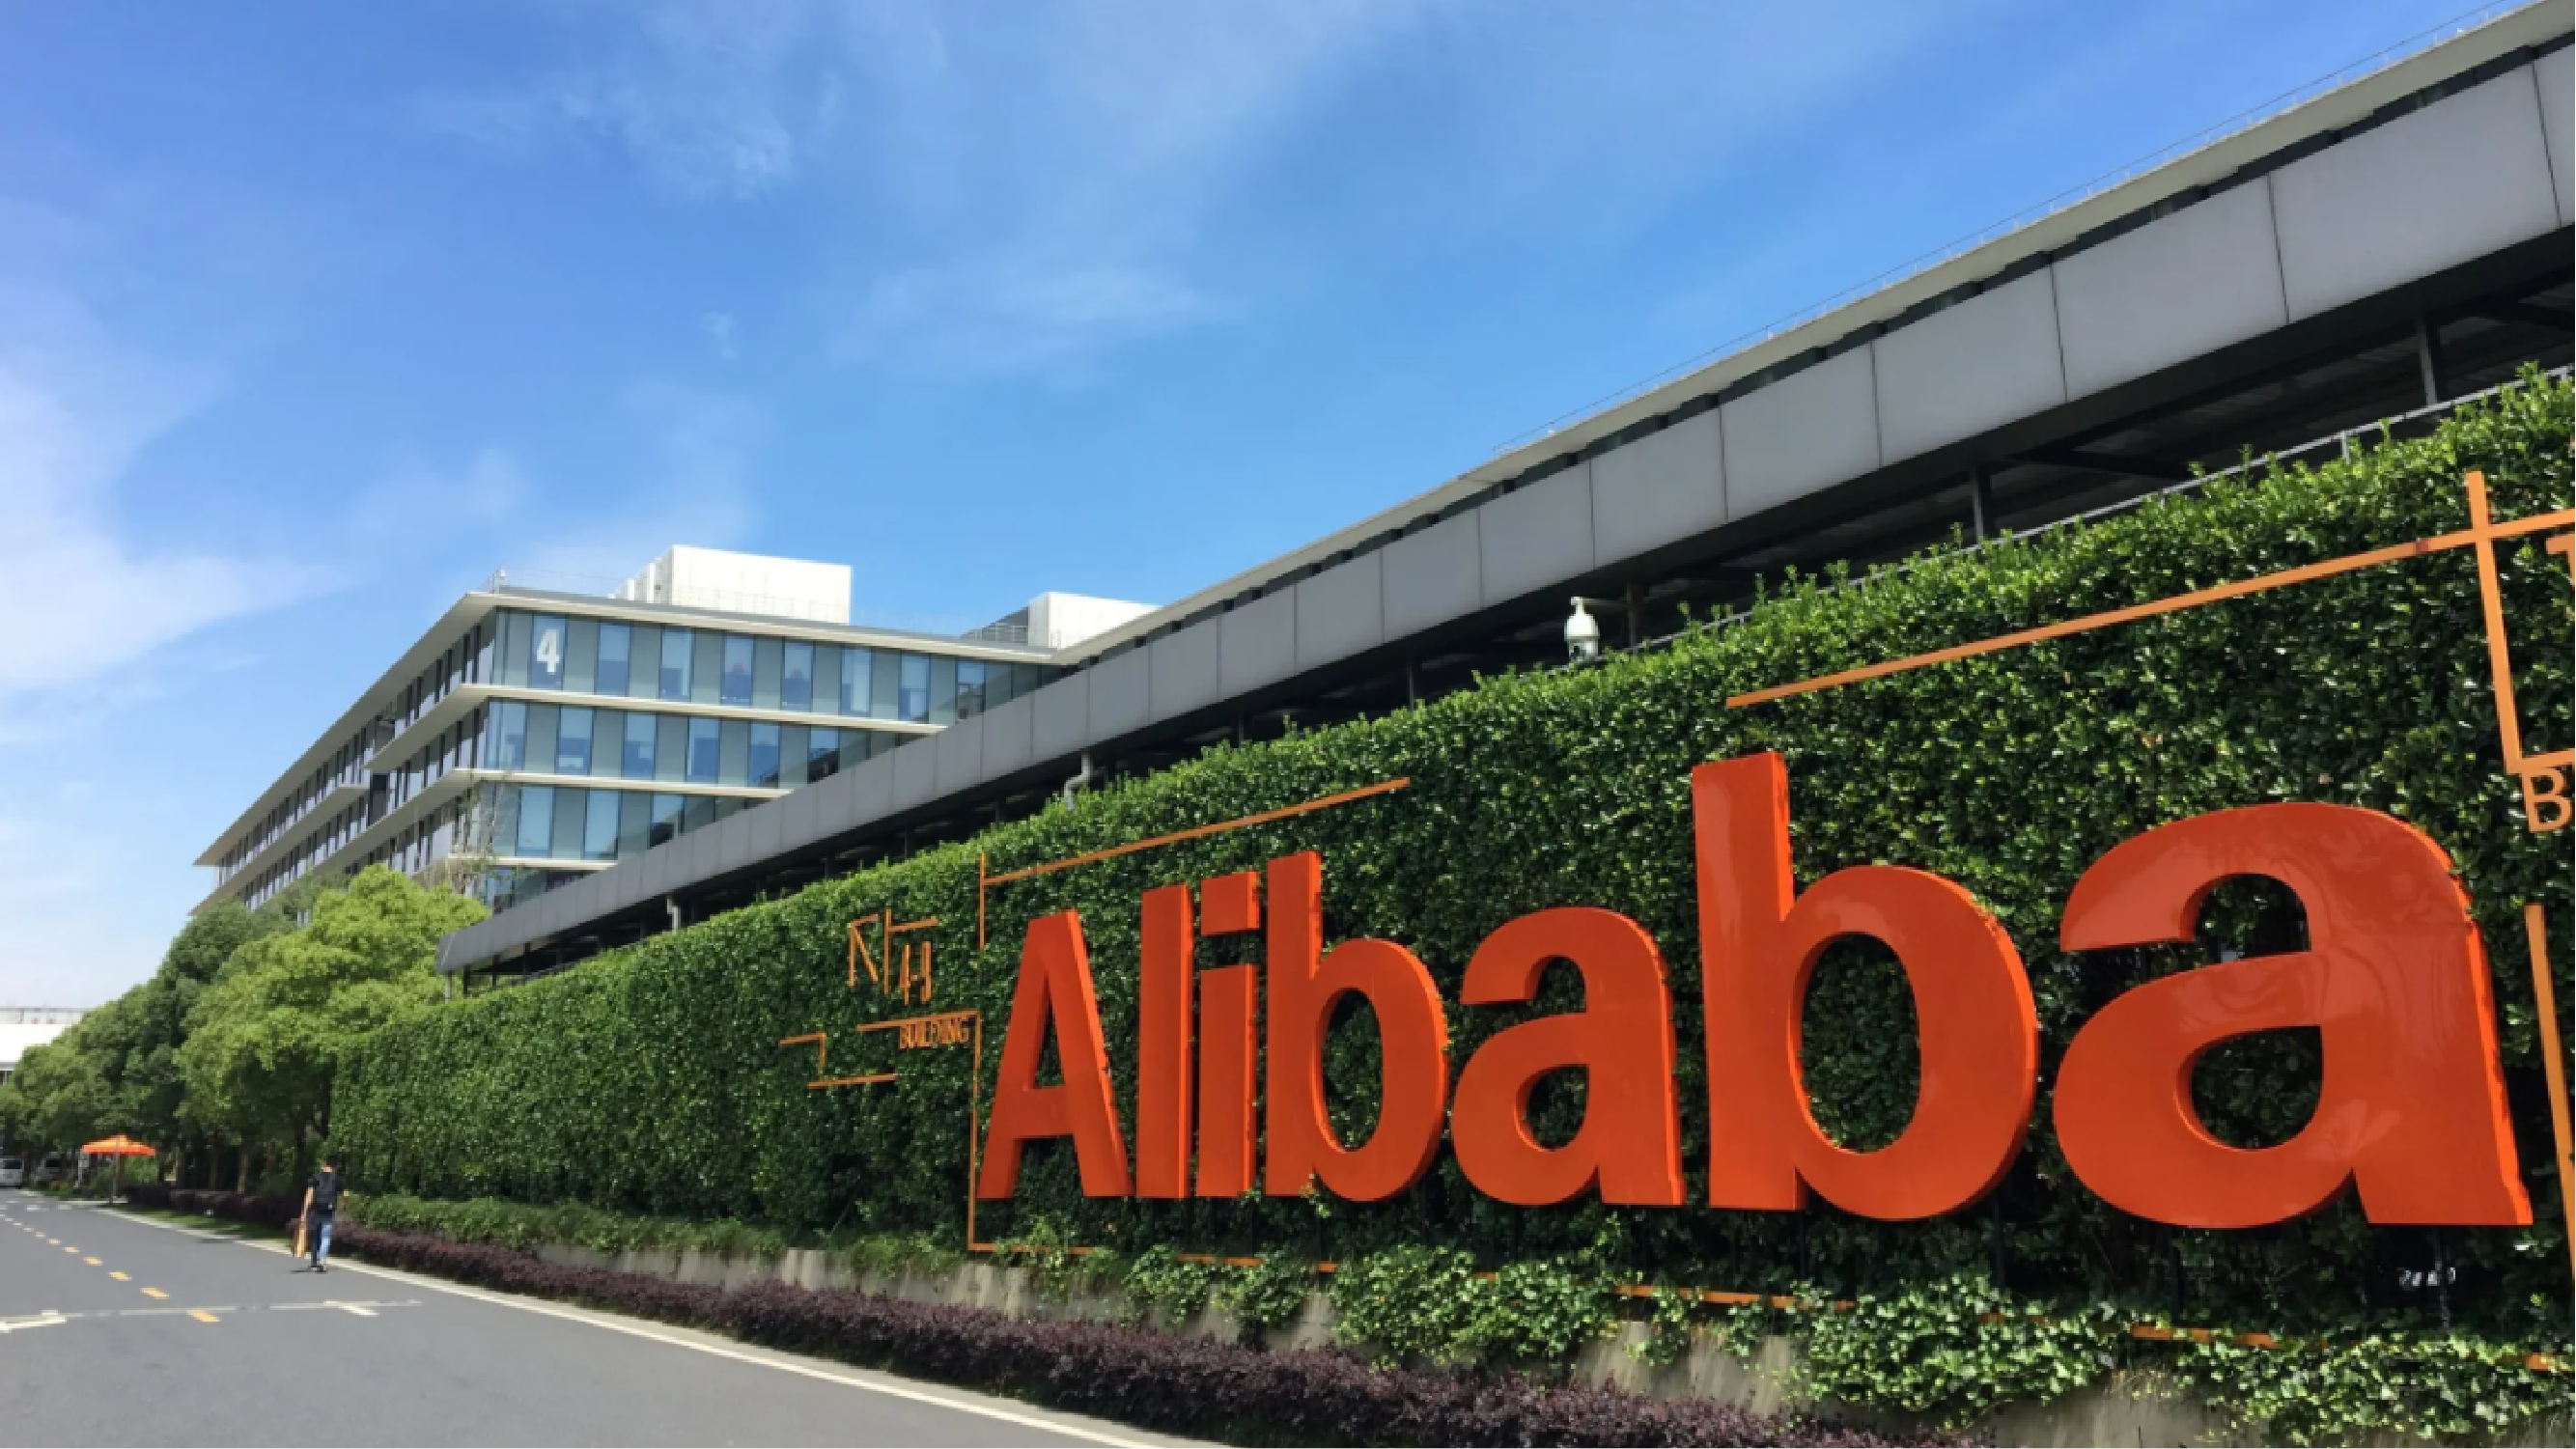 Alibaba Group's office building, representing the success of the BDDB programme in boosting innovation in e-commerce with data analytics